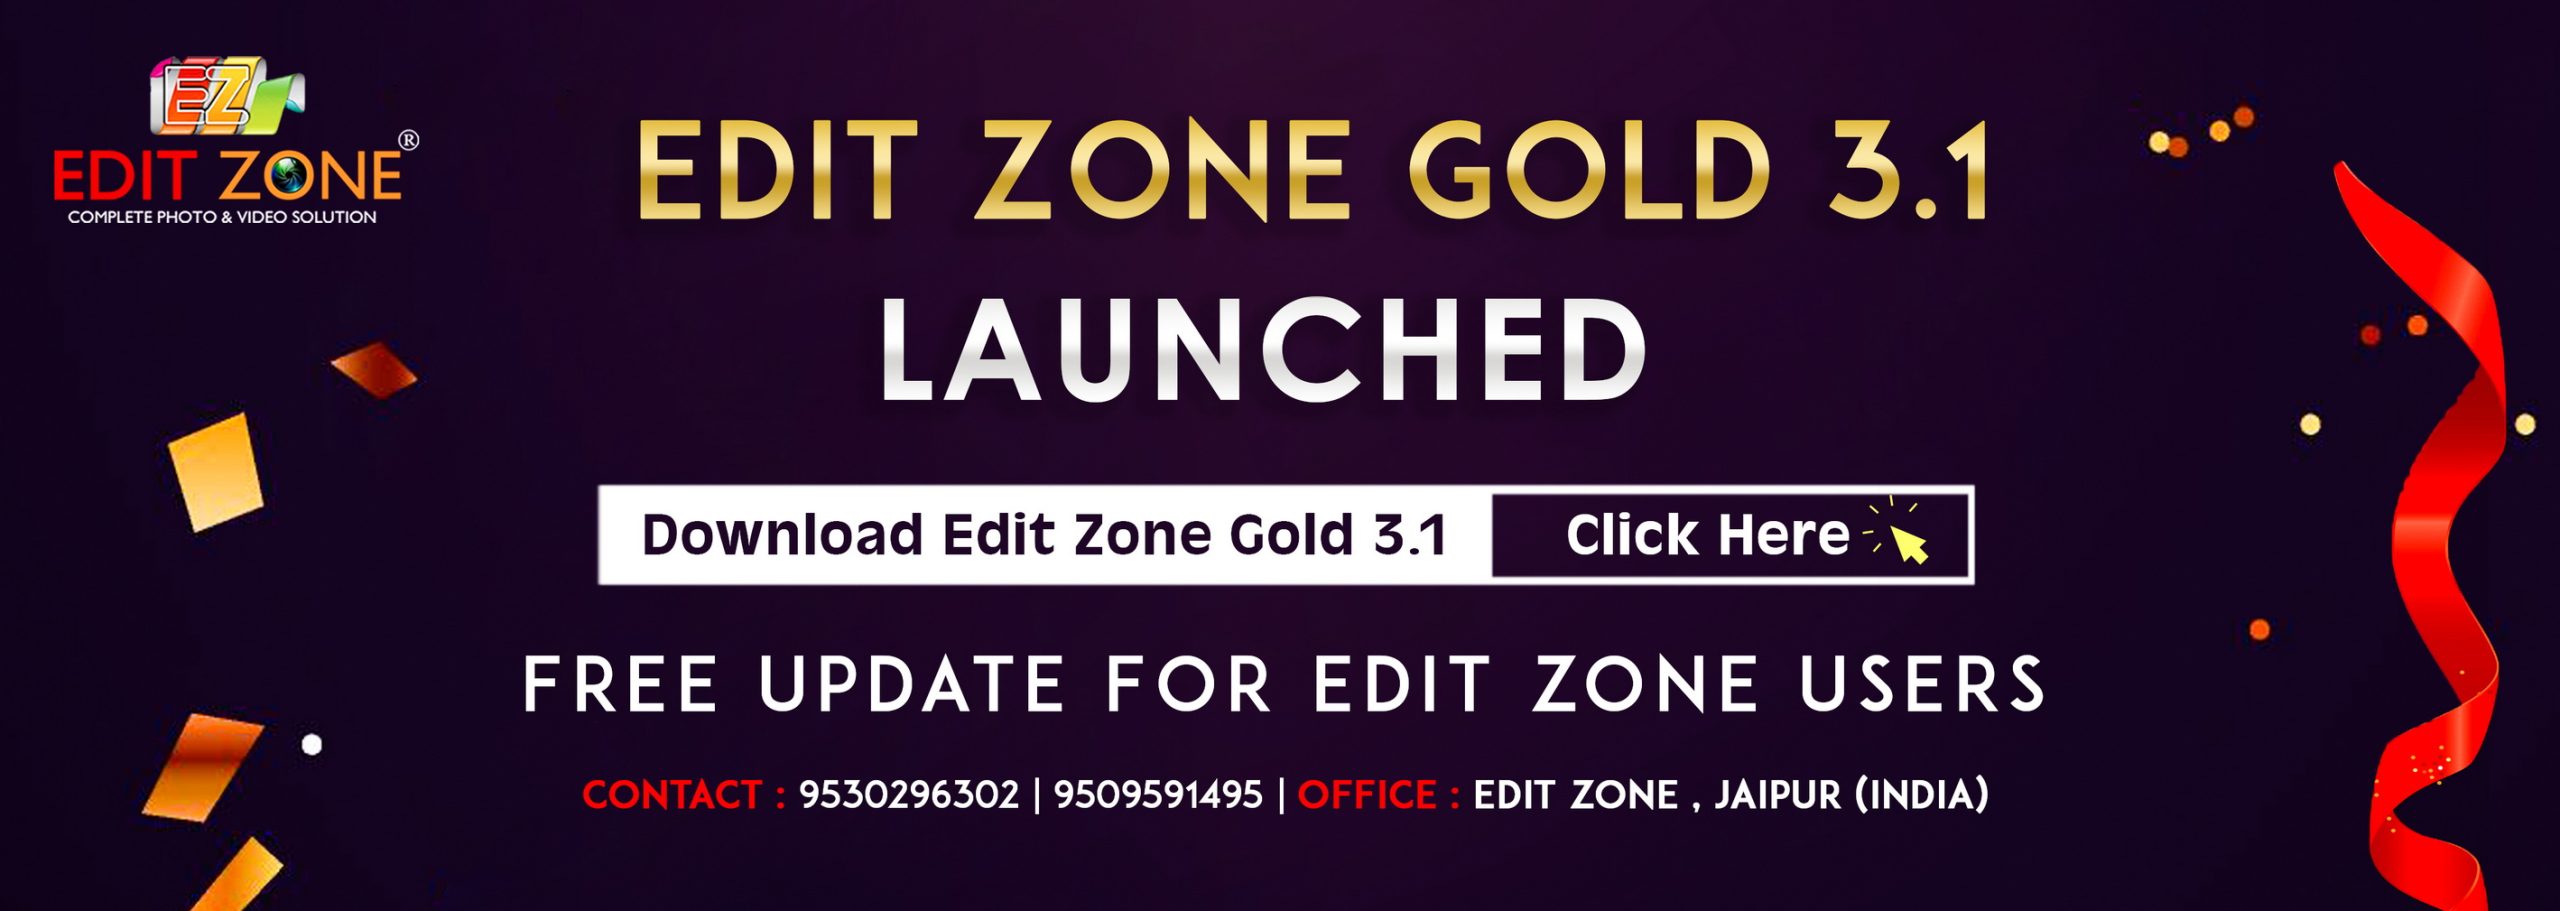 edit zone india 3.1 updates poster scaled